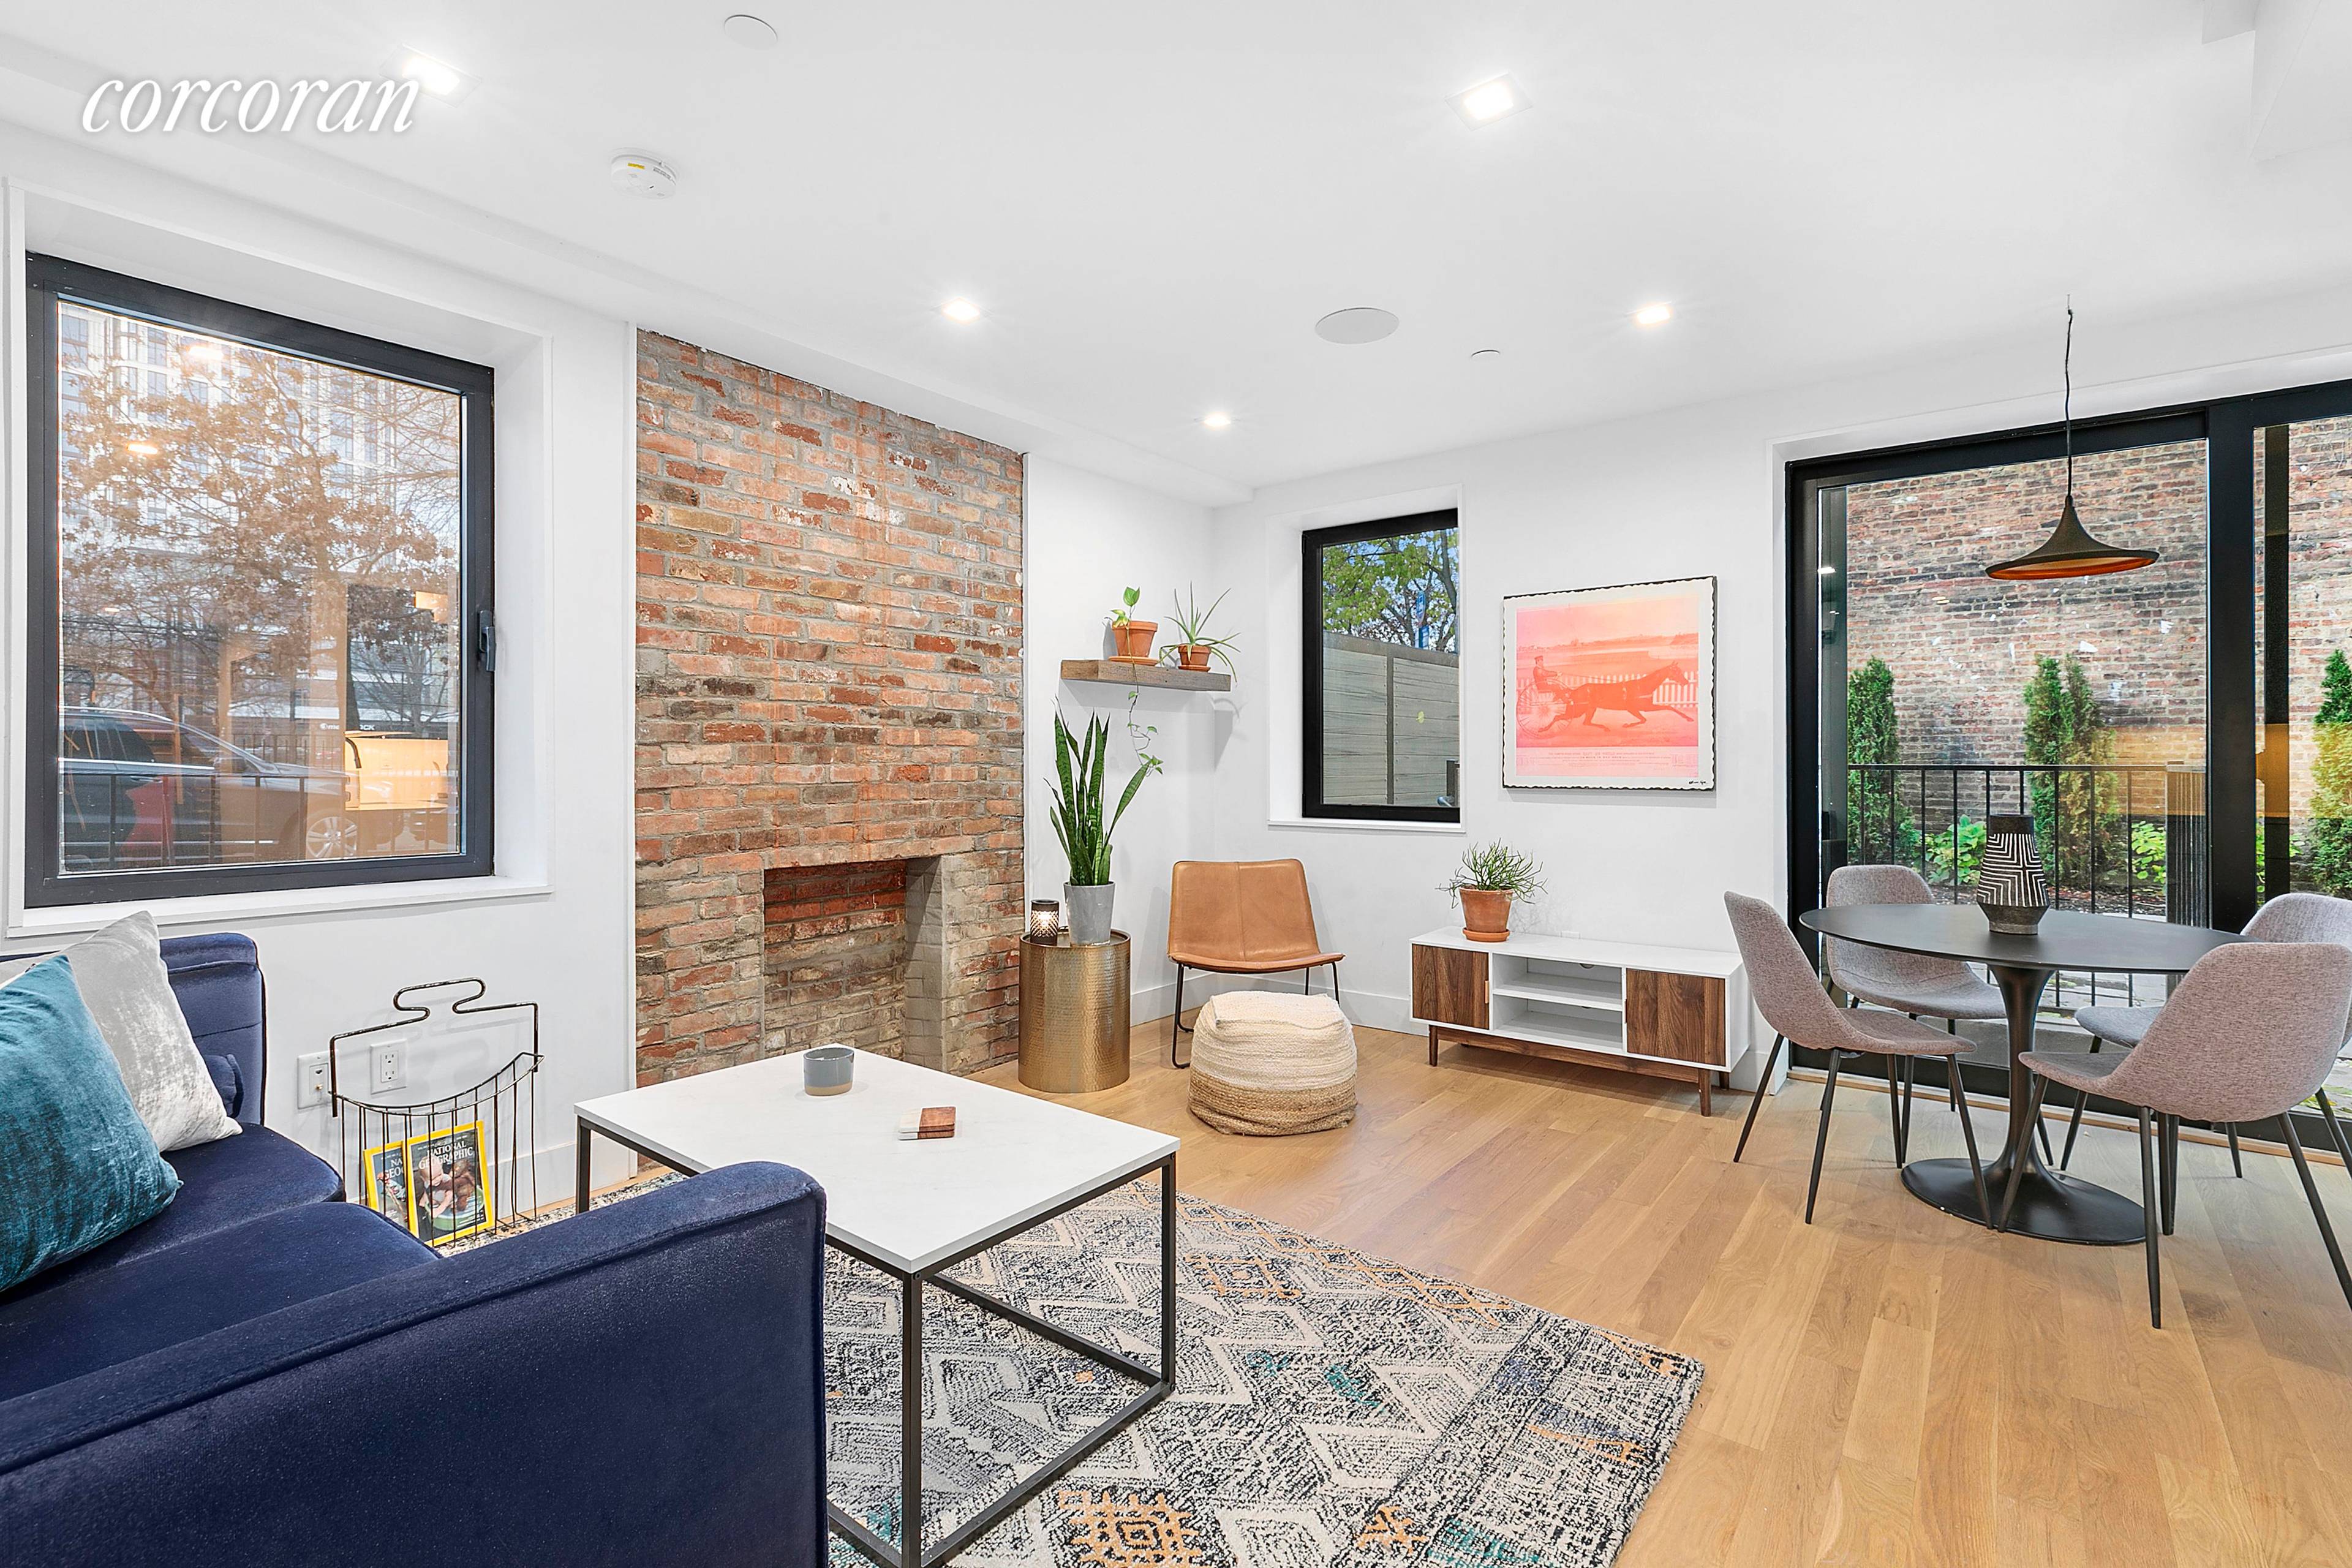 SHOWINGS amp ; OPEN HOUSES BY APPOINTMENT ONLY Old Meets New, Style Meets Function, Williamsburg ; Meet 315 South 5th Street.